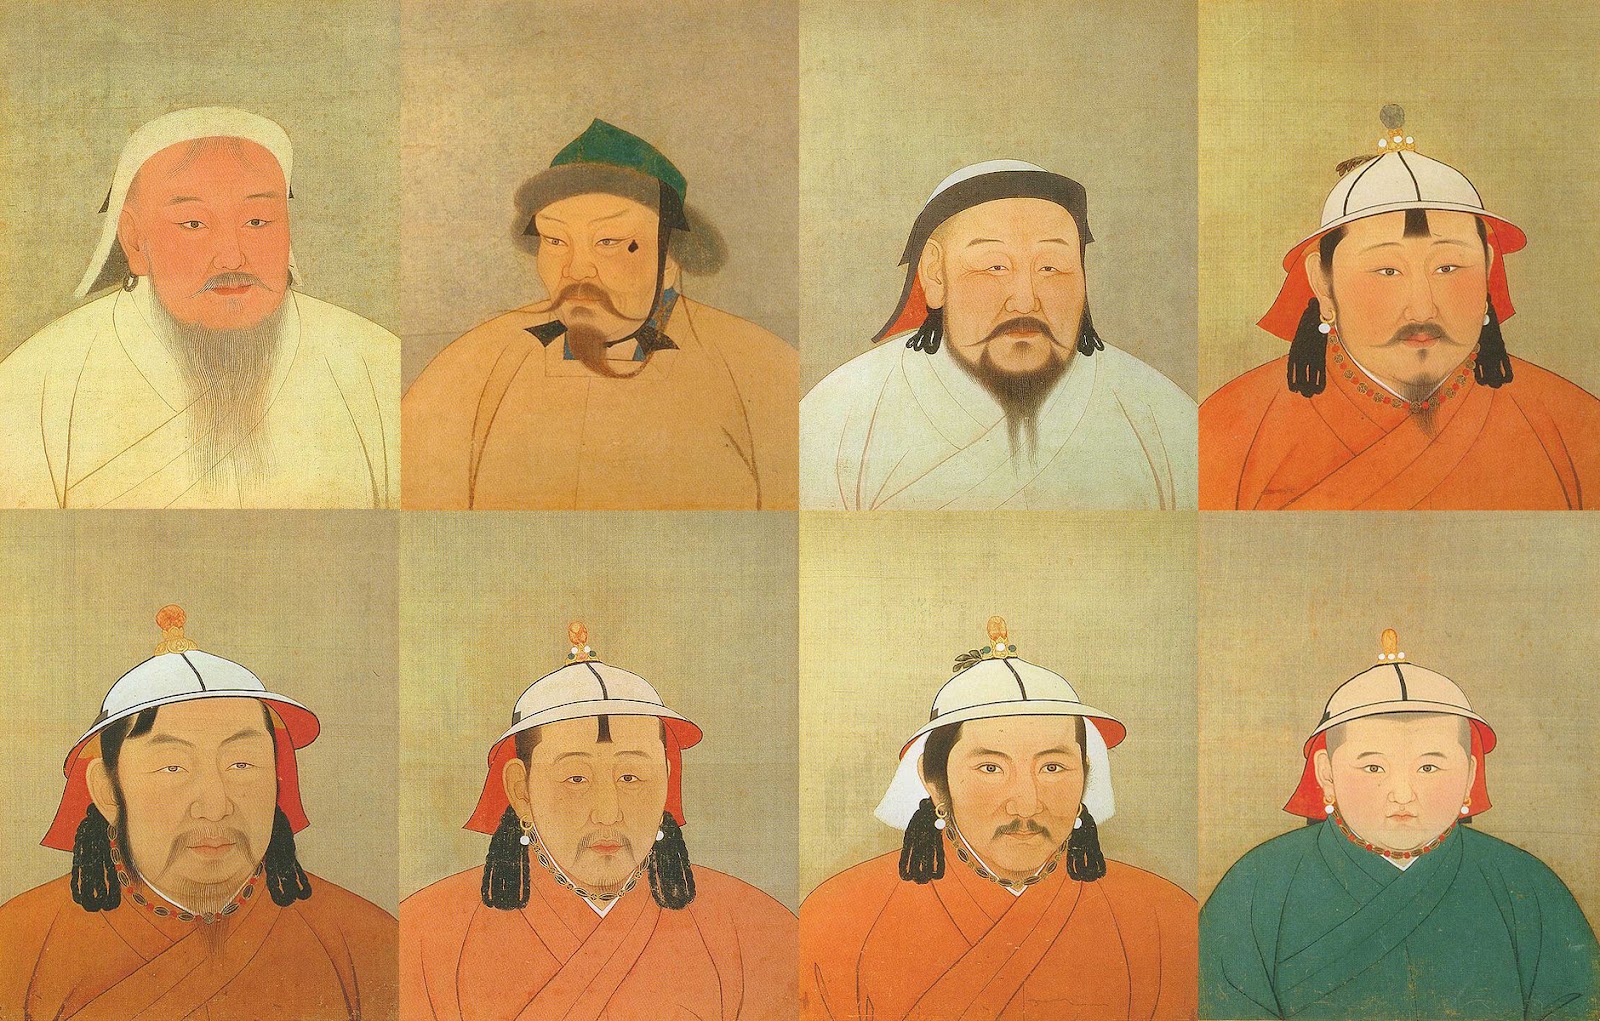 Genghis Khan and other Khan leaders throughout the Army's history. Image via Wikimedia Commons.